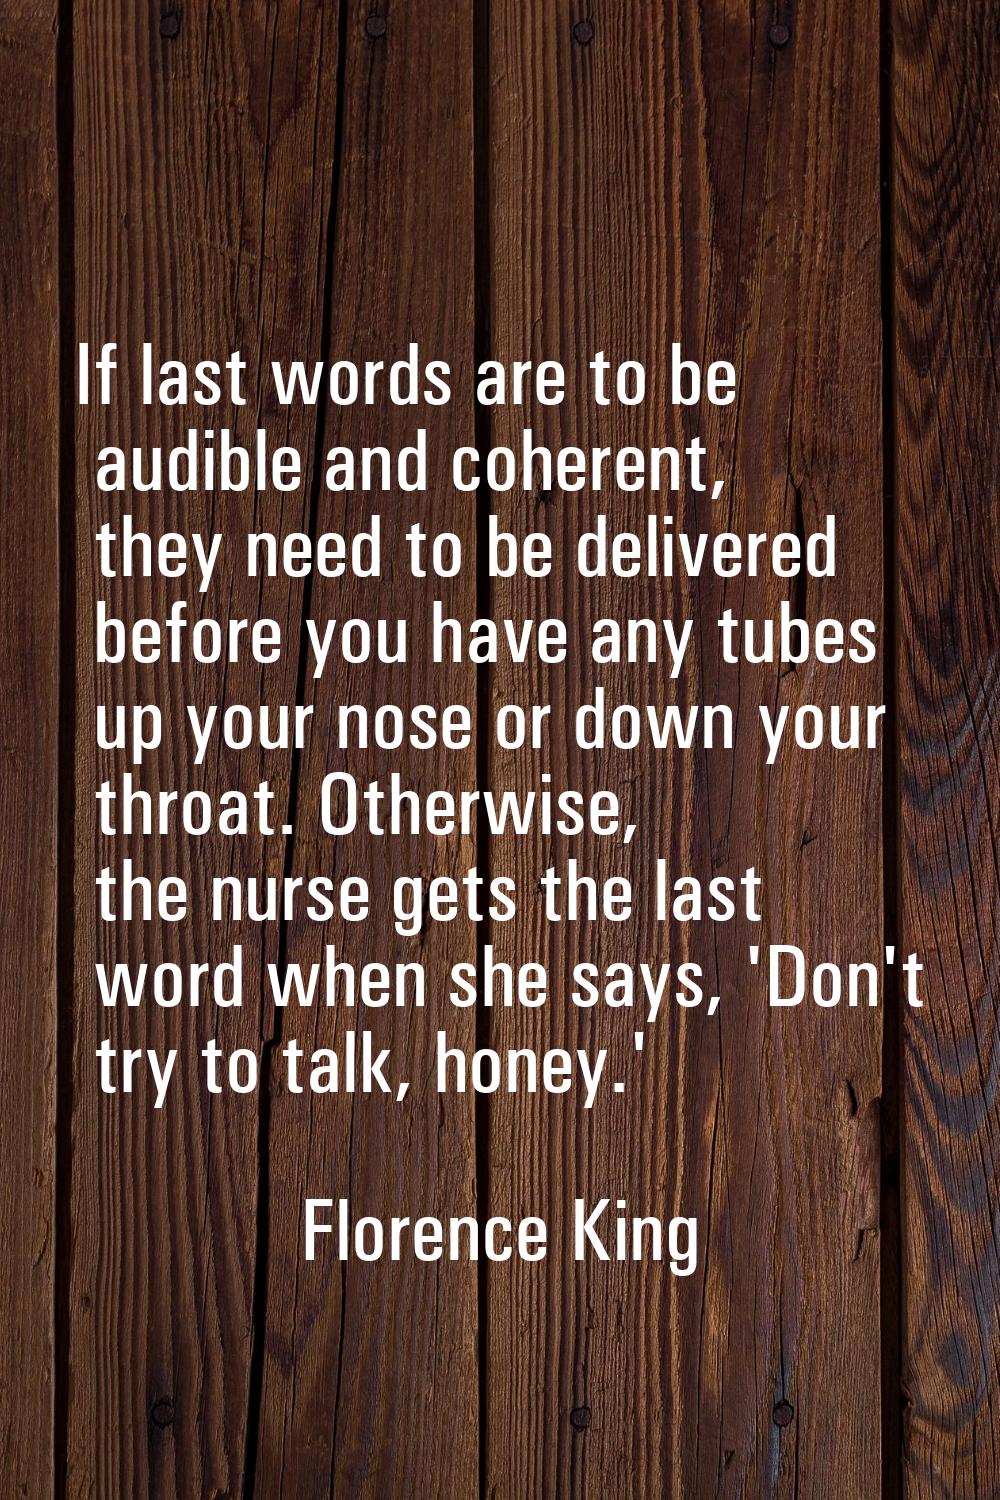 If last words are to be audible and coherent, they need to be delivered before you have any tubes u